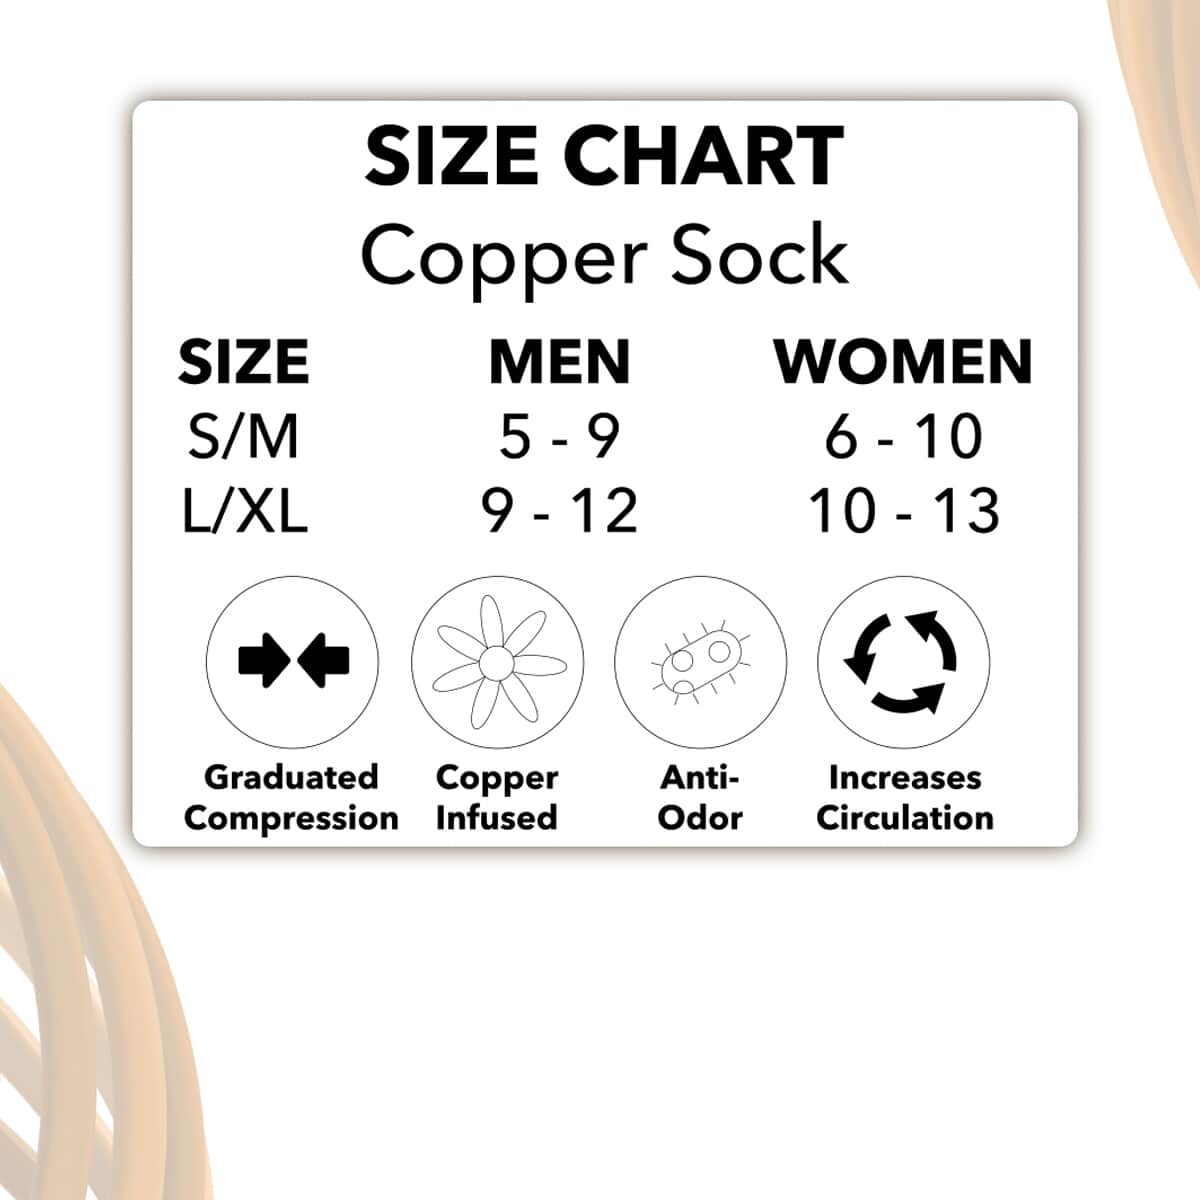 Set of 4 Pairs of Ankle Length Odor Free Copper Compression Socks For Men And Women, Premium Material Moisture Wicking Unisex Copper Infused Socks - White (L/XL) image number 5